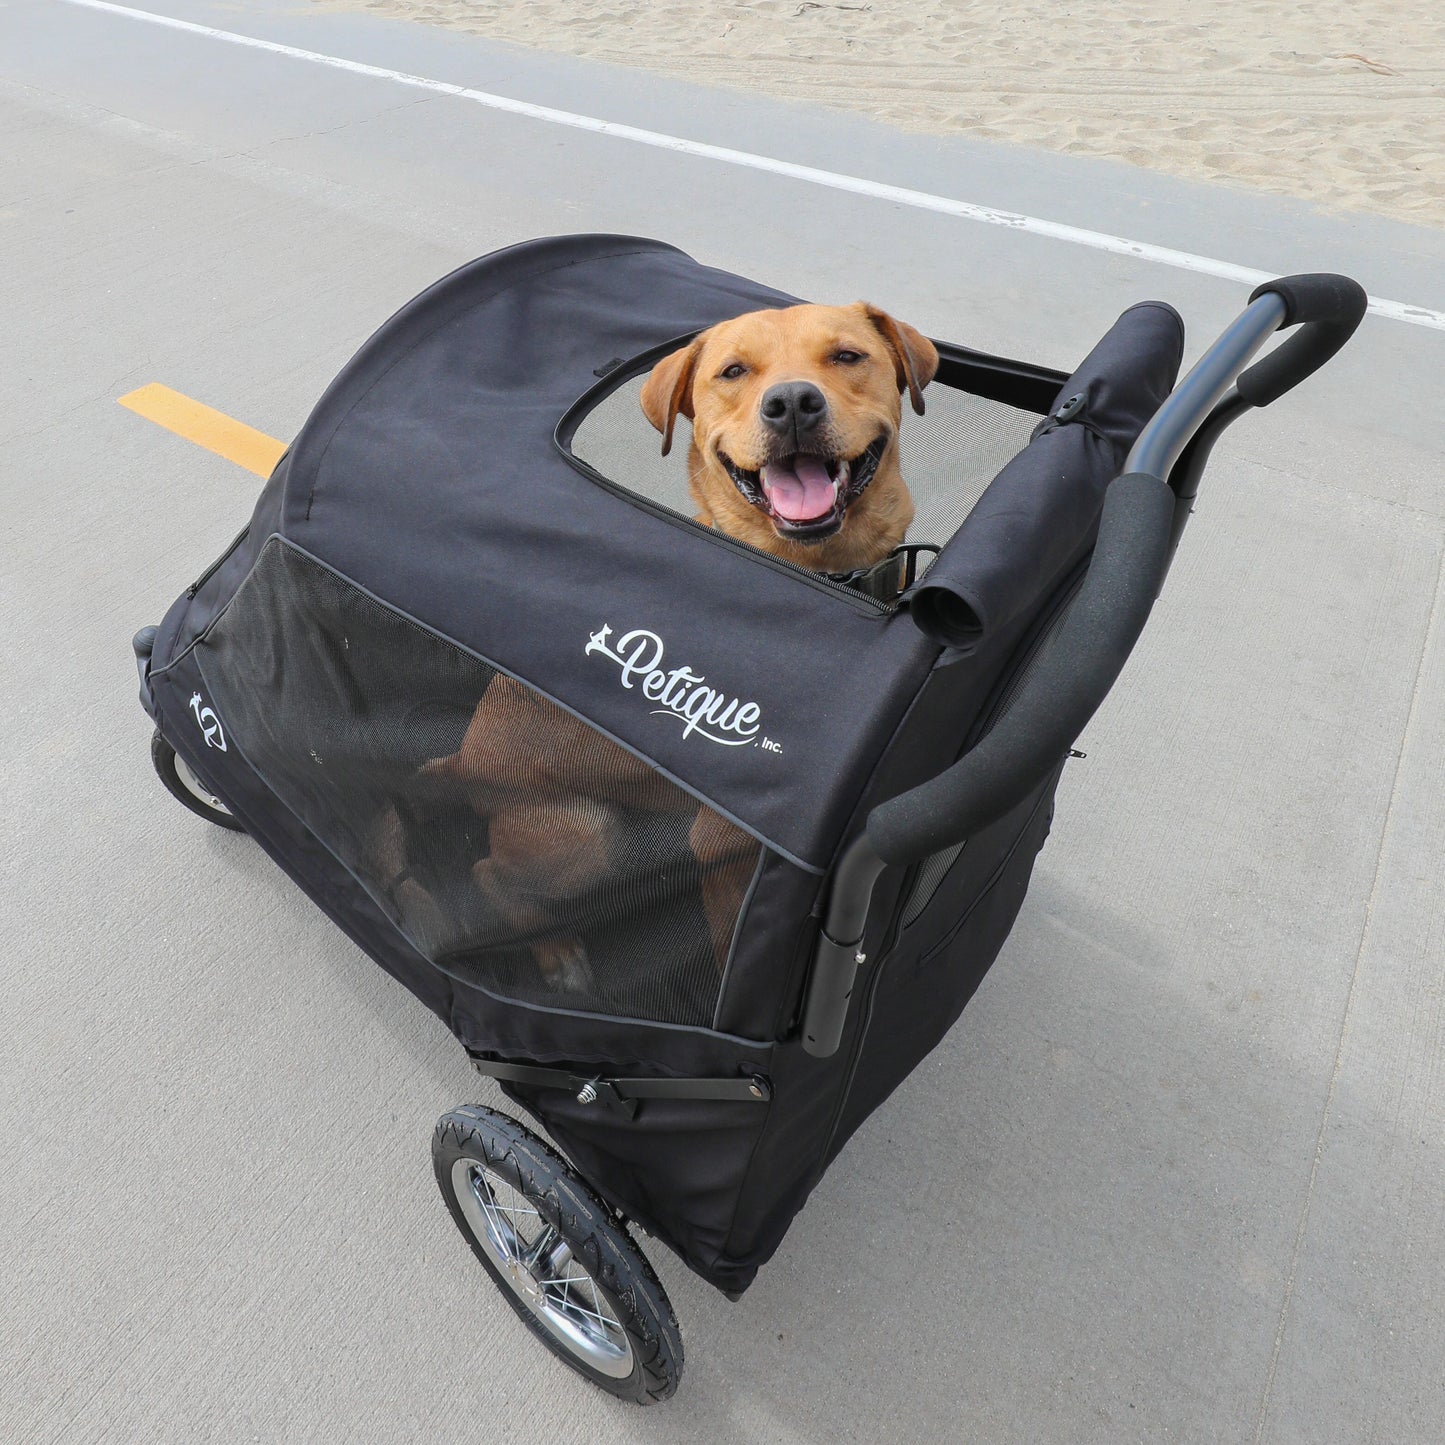 top window on pet stroller for dogs